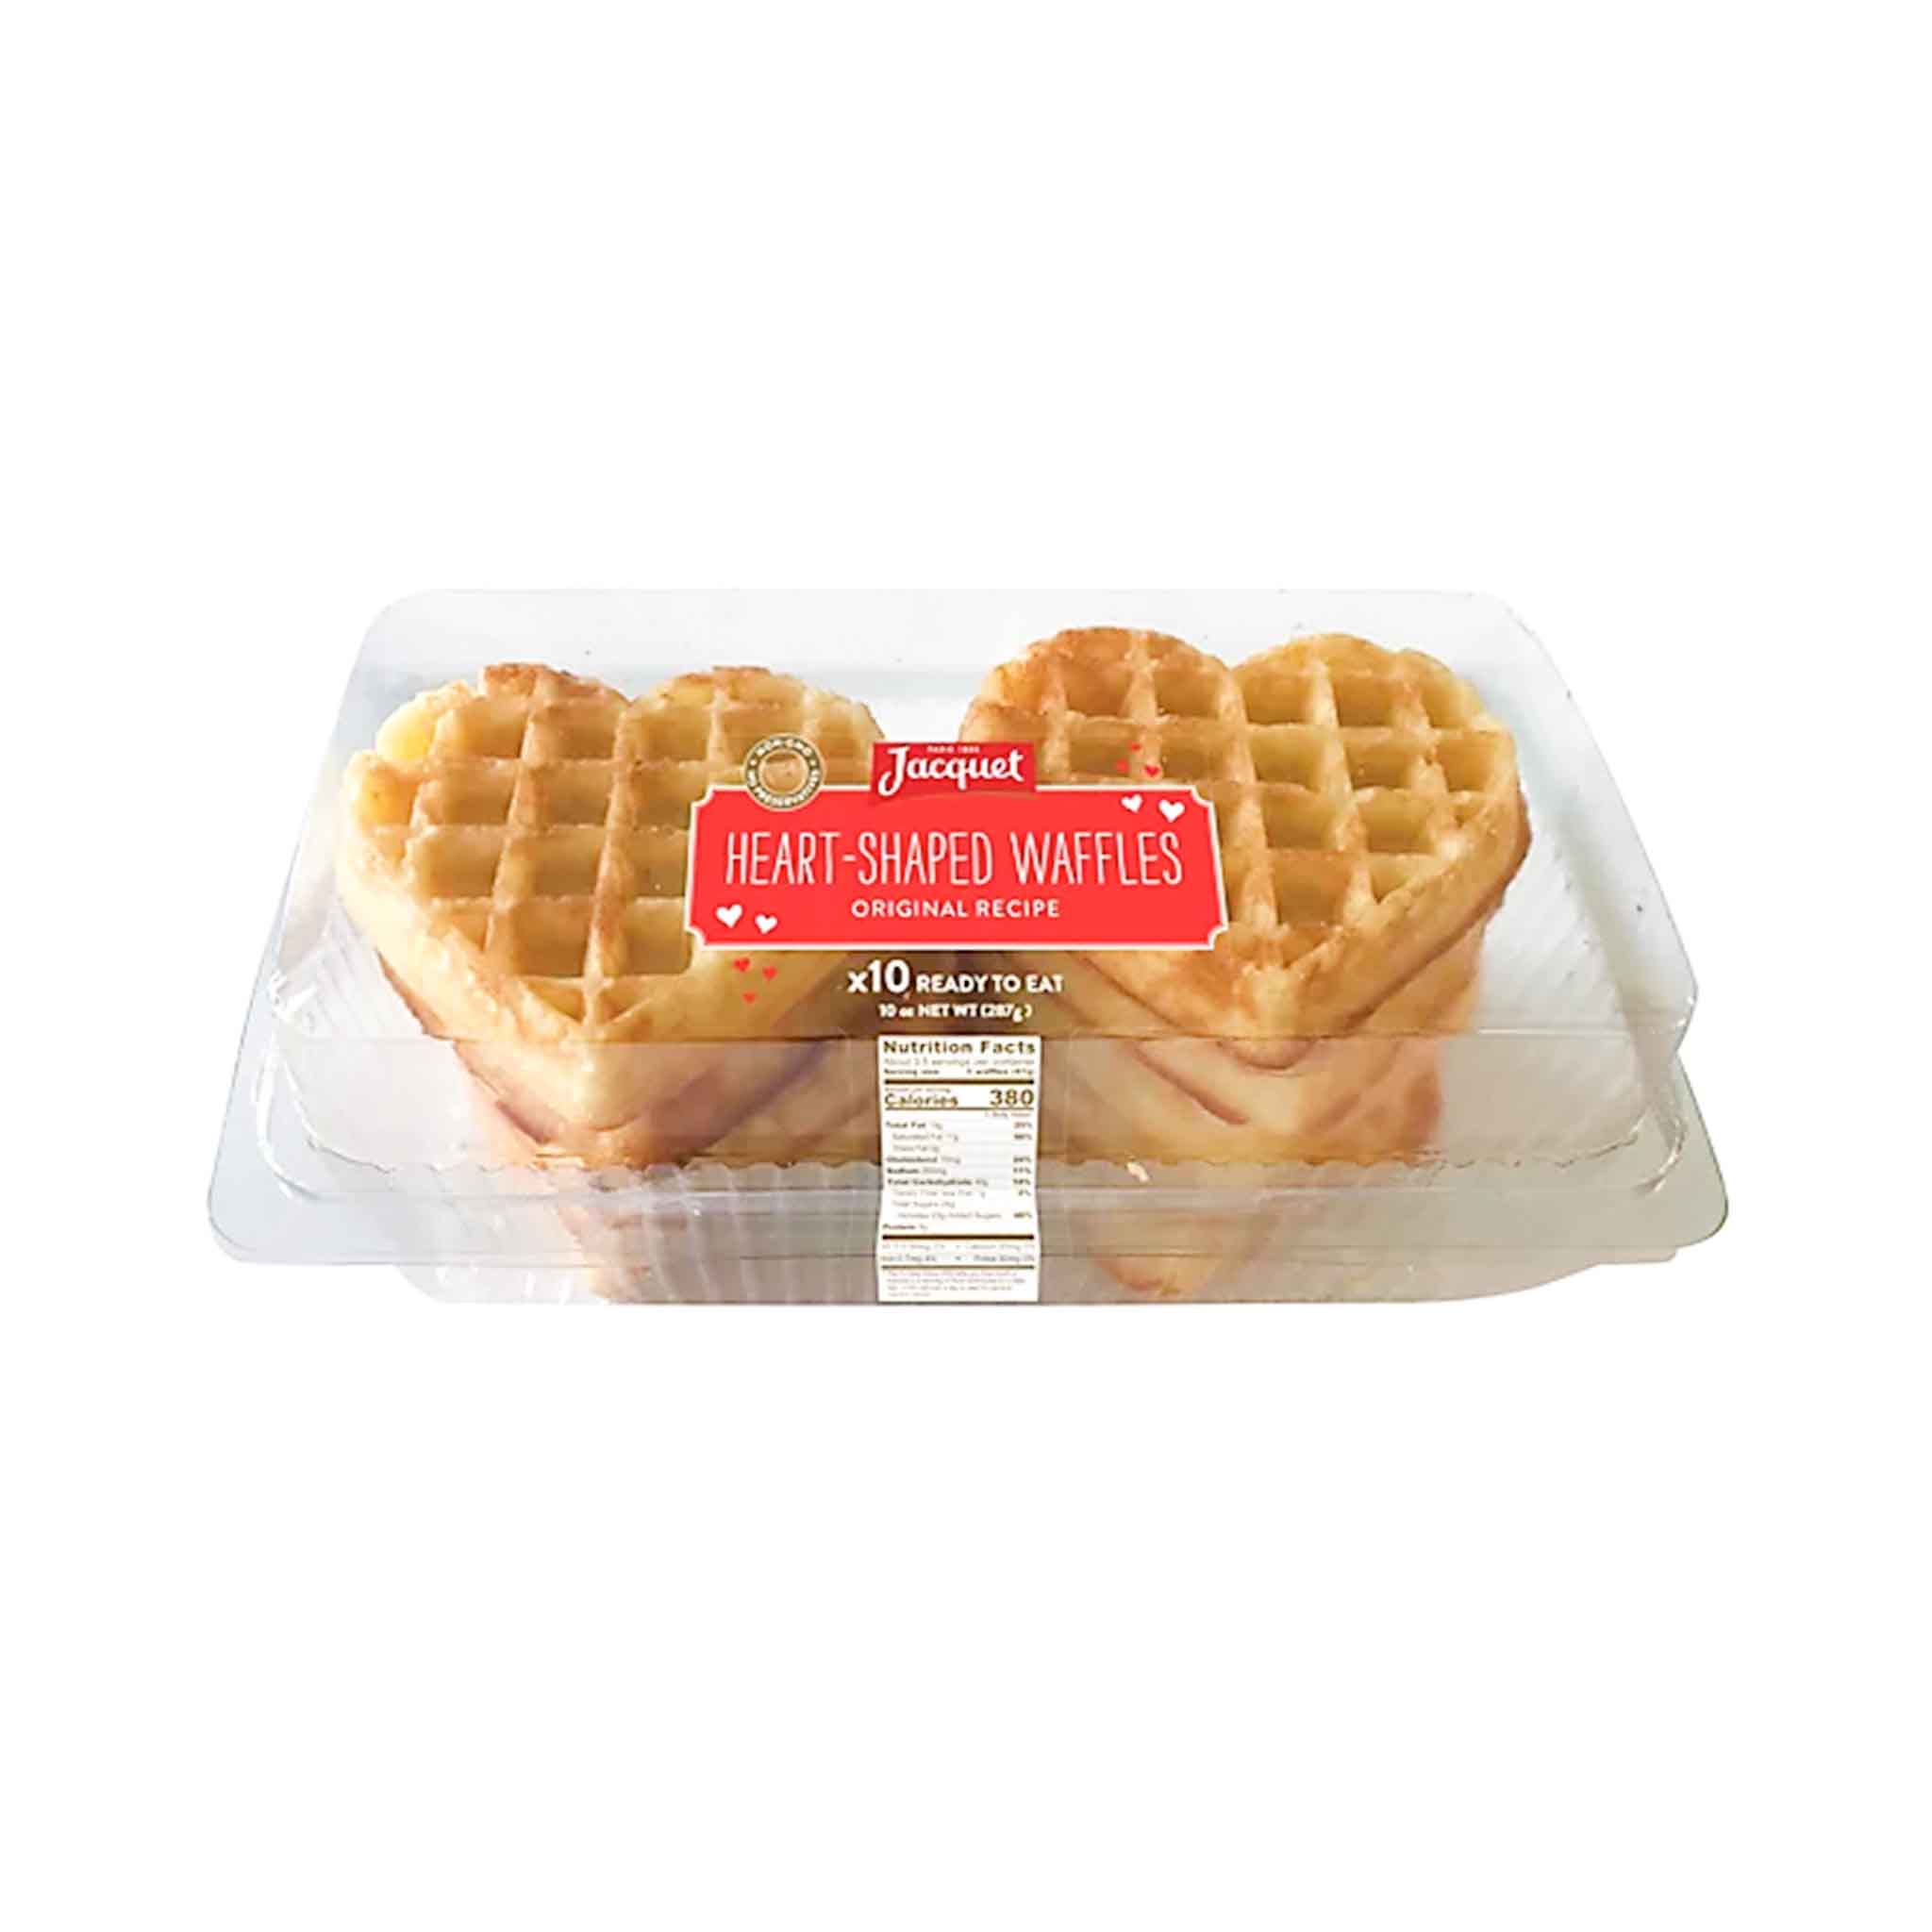 Jacquet Heart Shaped Waffles in a Box